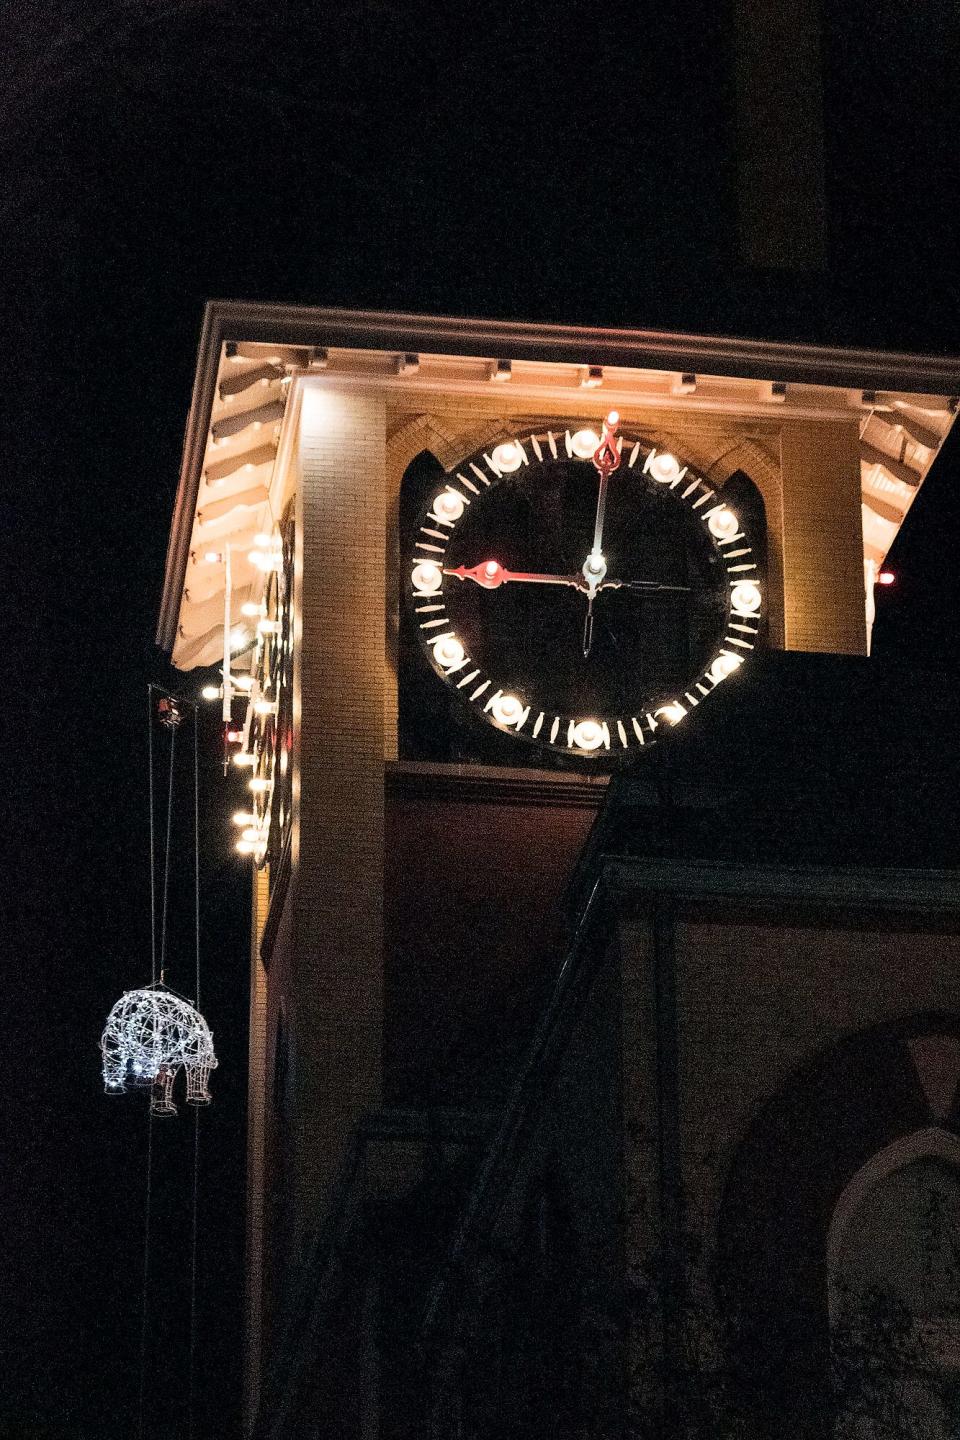 The city of New Bern, N.C., is encouraging a safe New Year’s Eve celebration by hosting a virtual Bear Drop downtown. The event will be streamed live on Facebook.